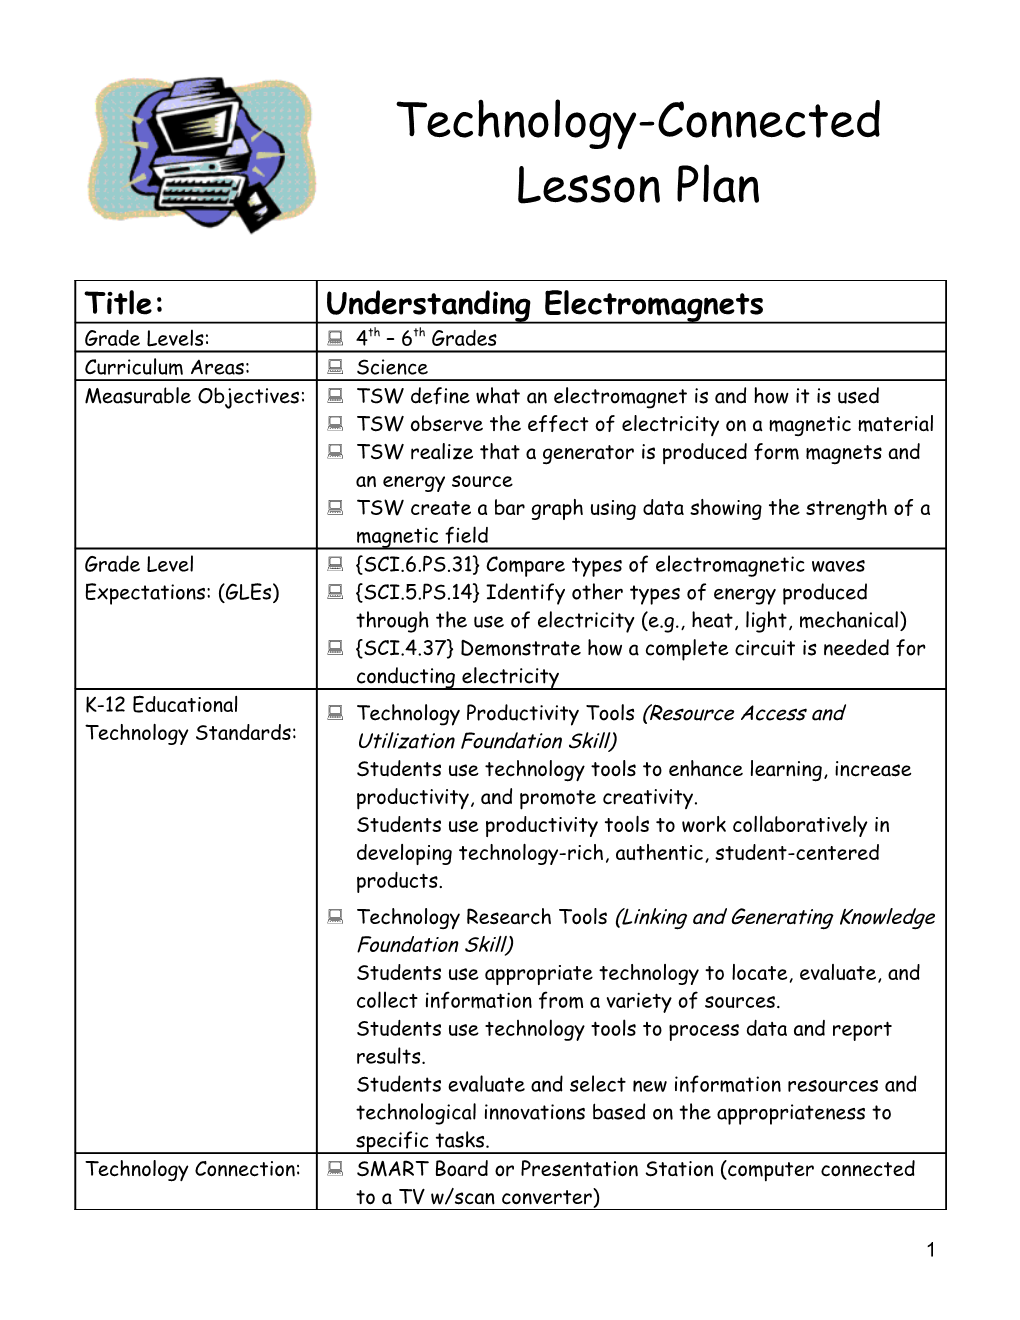 Technology-Connected Lesson Plan s4